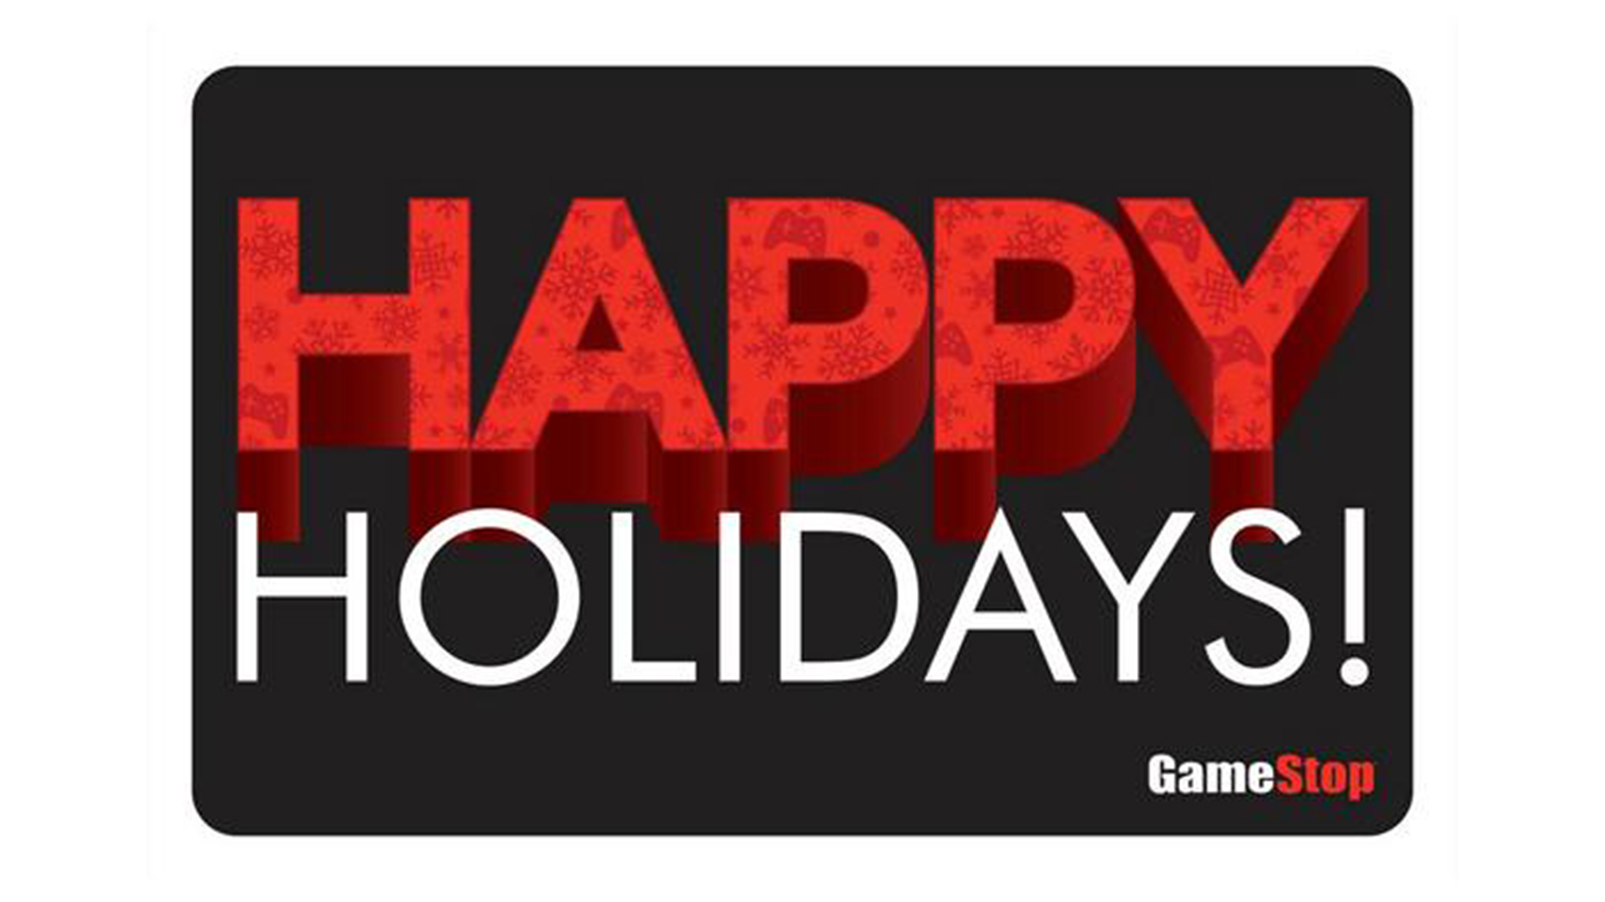 can you buy steam gift cards at gamestop